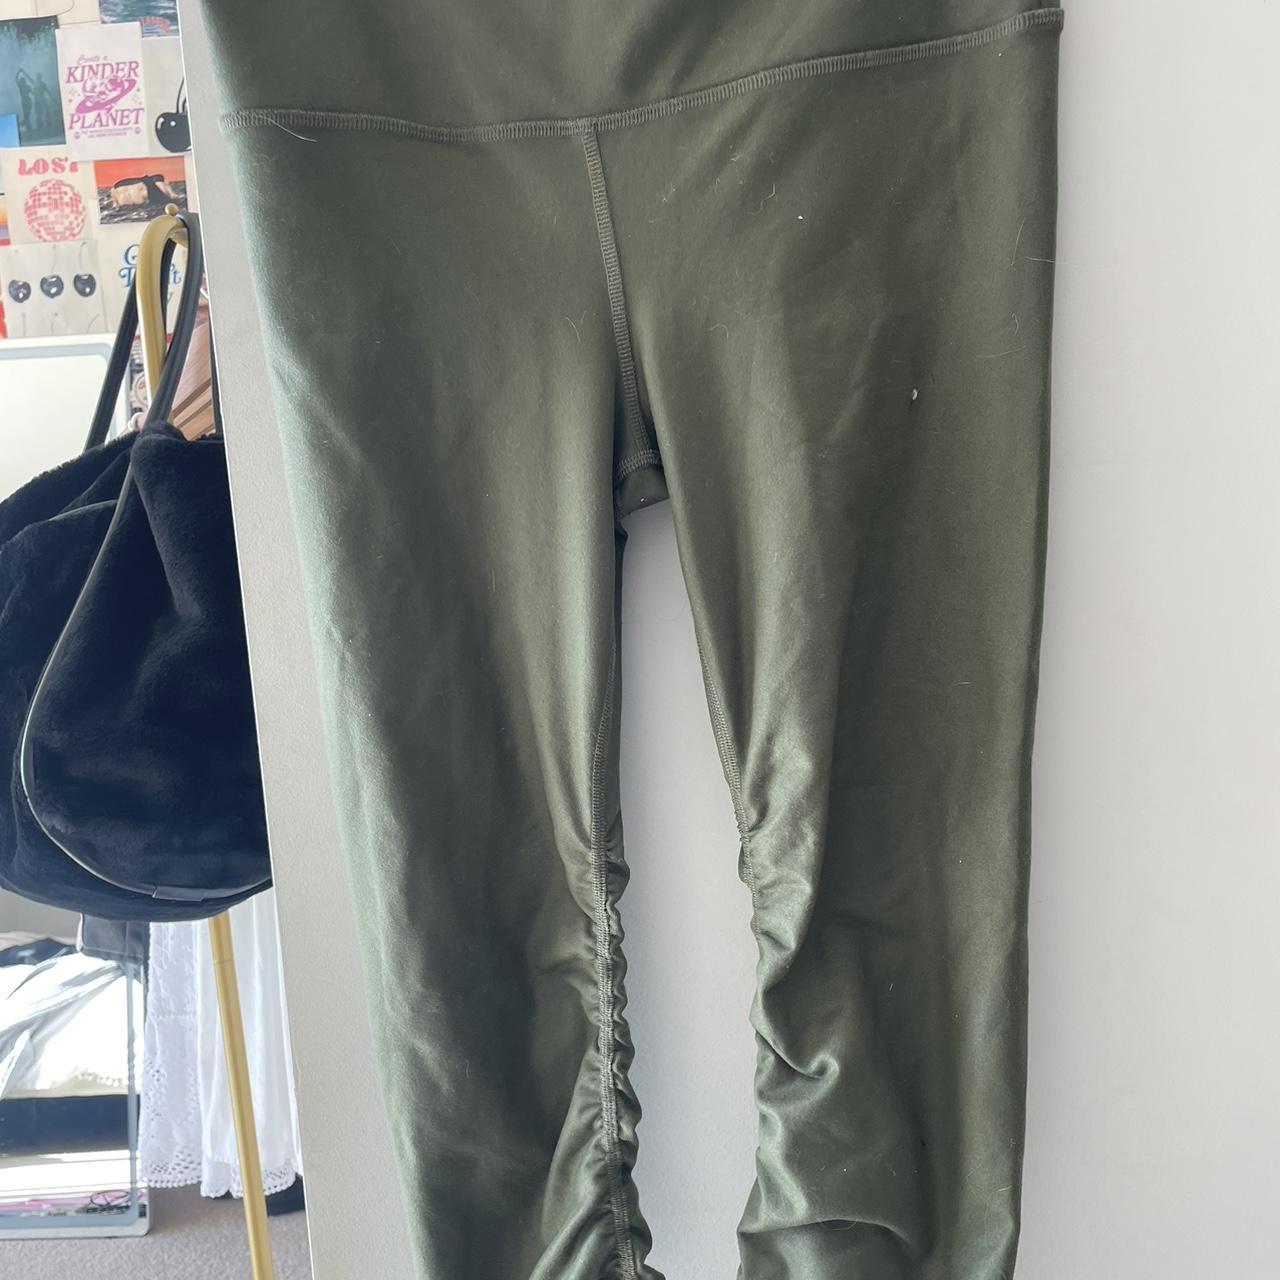 90 DEGREE'S LEGGINGS classic sage color size small - Depop